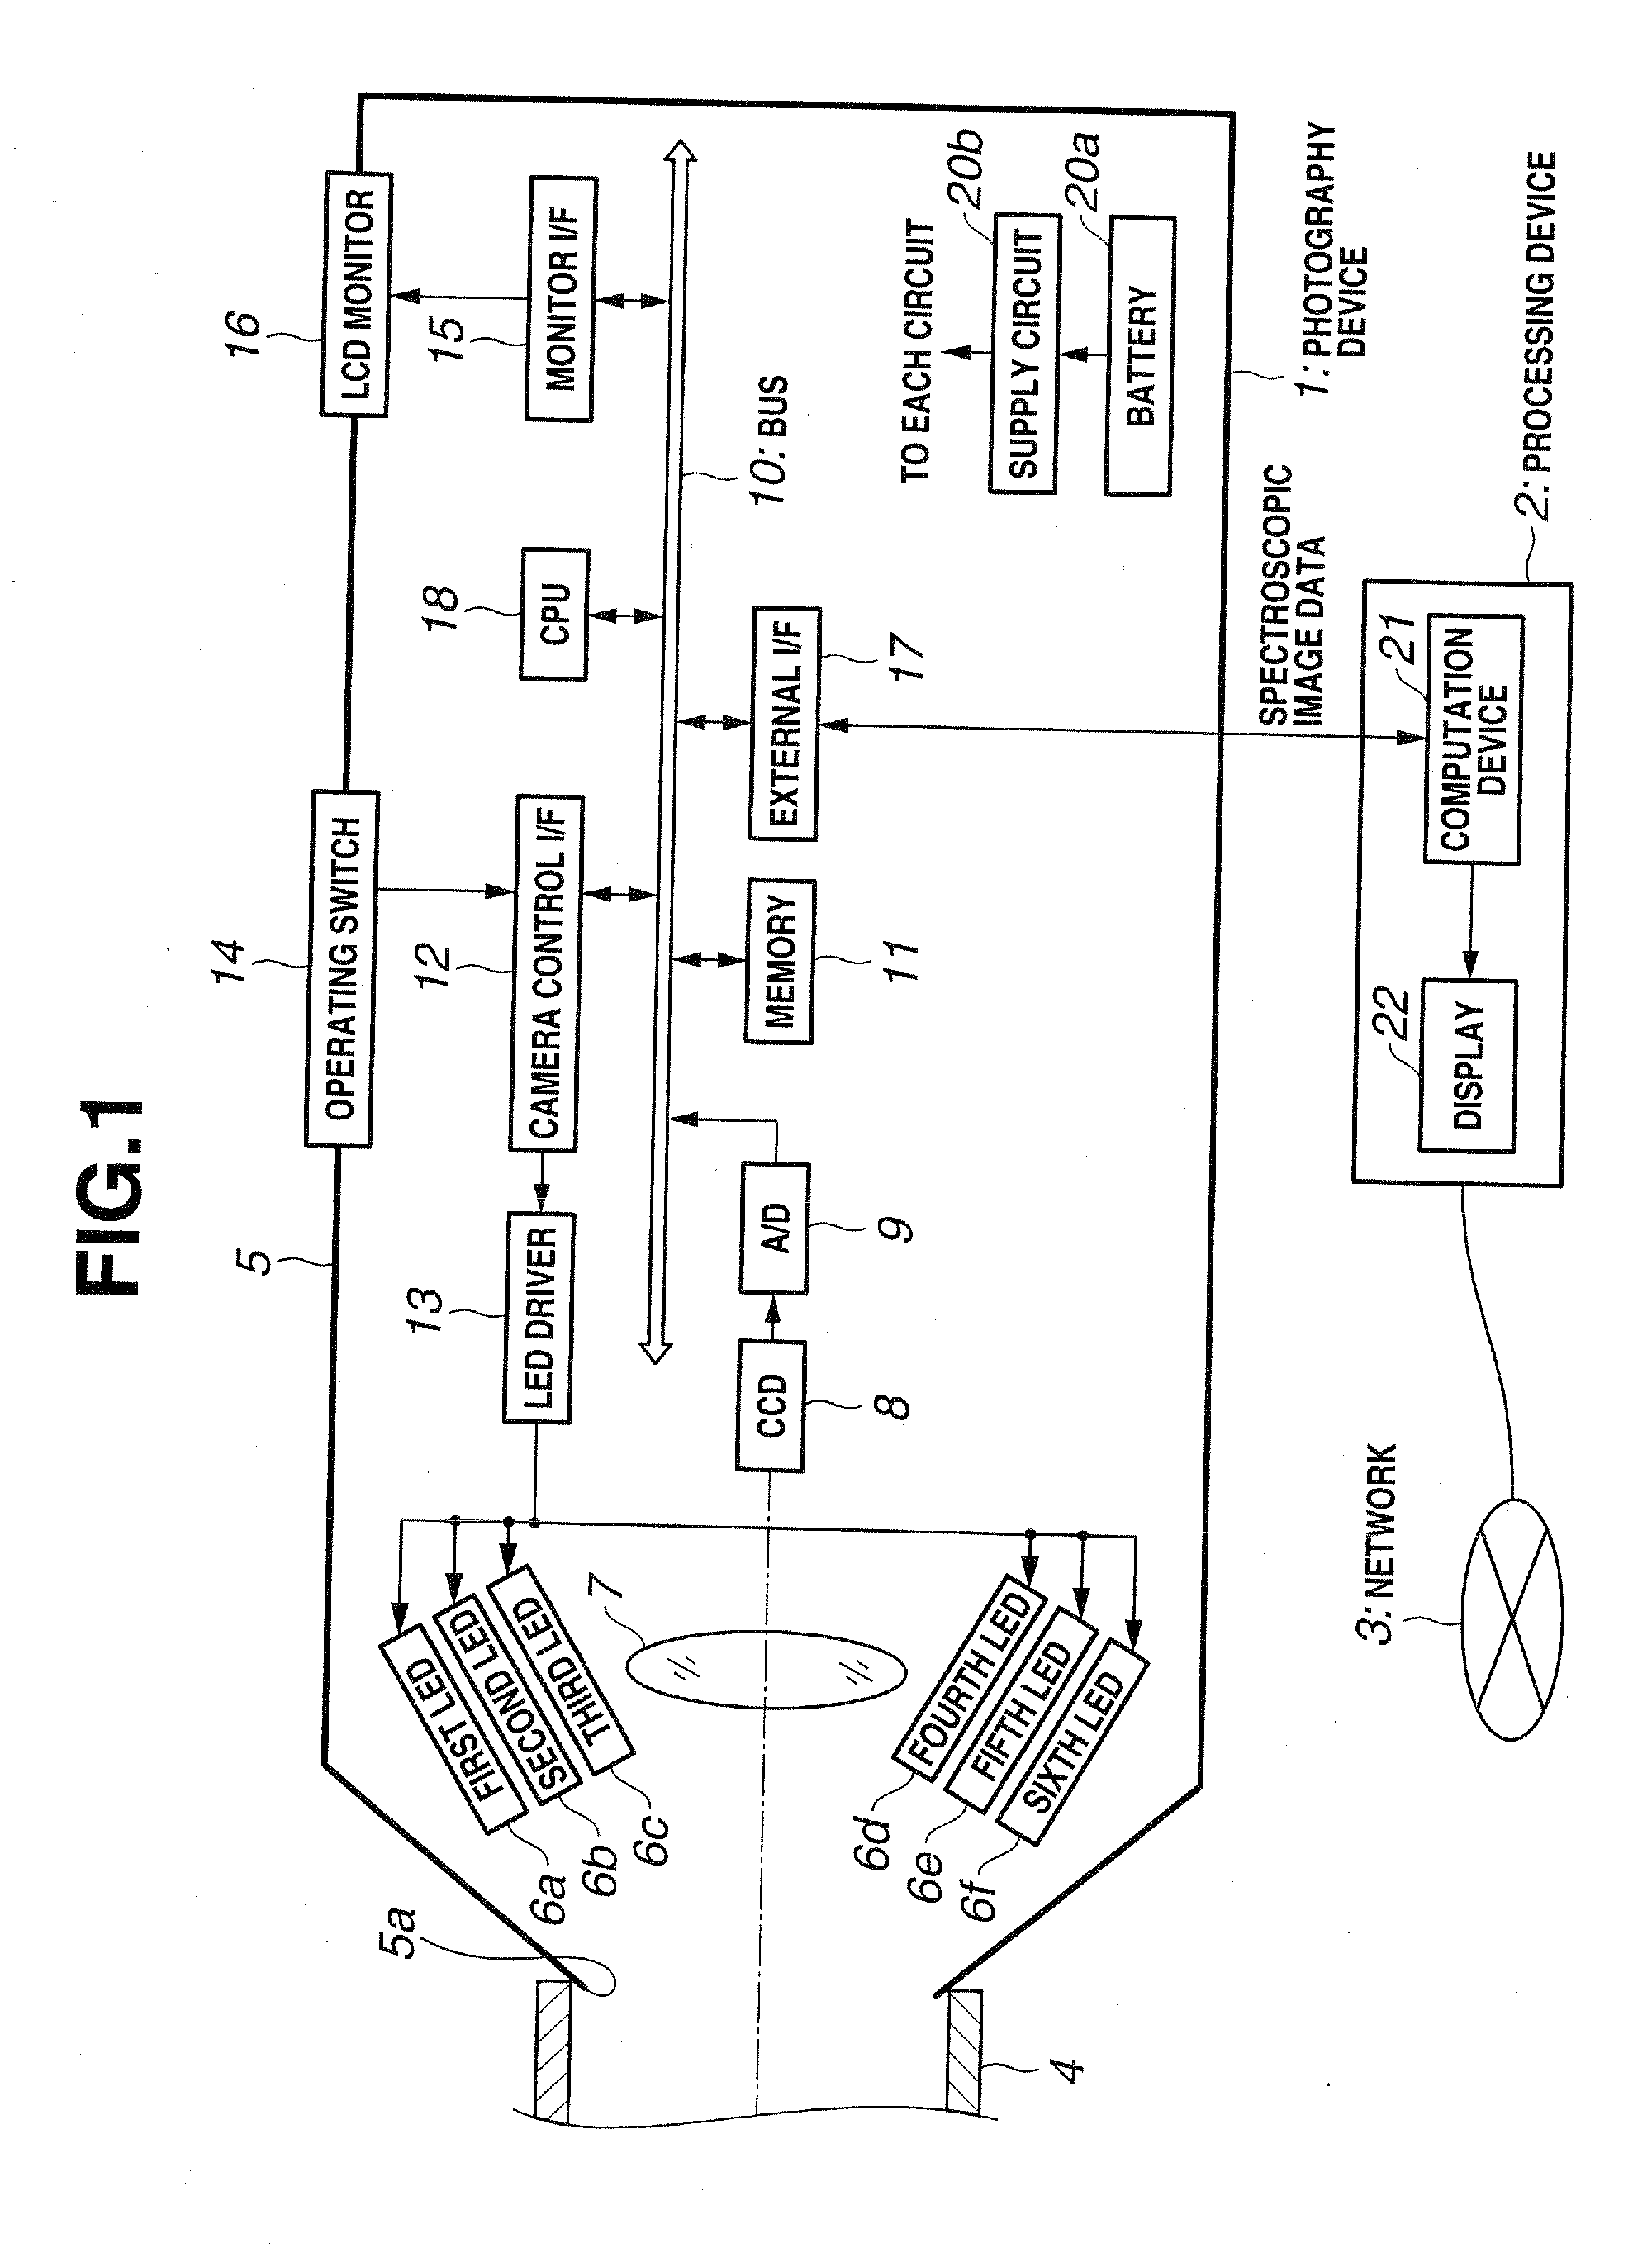 Image processing system and camera